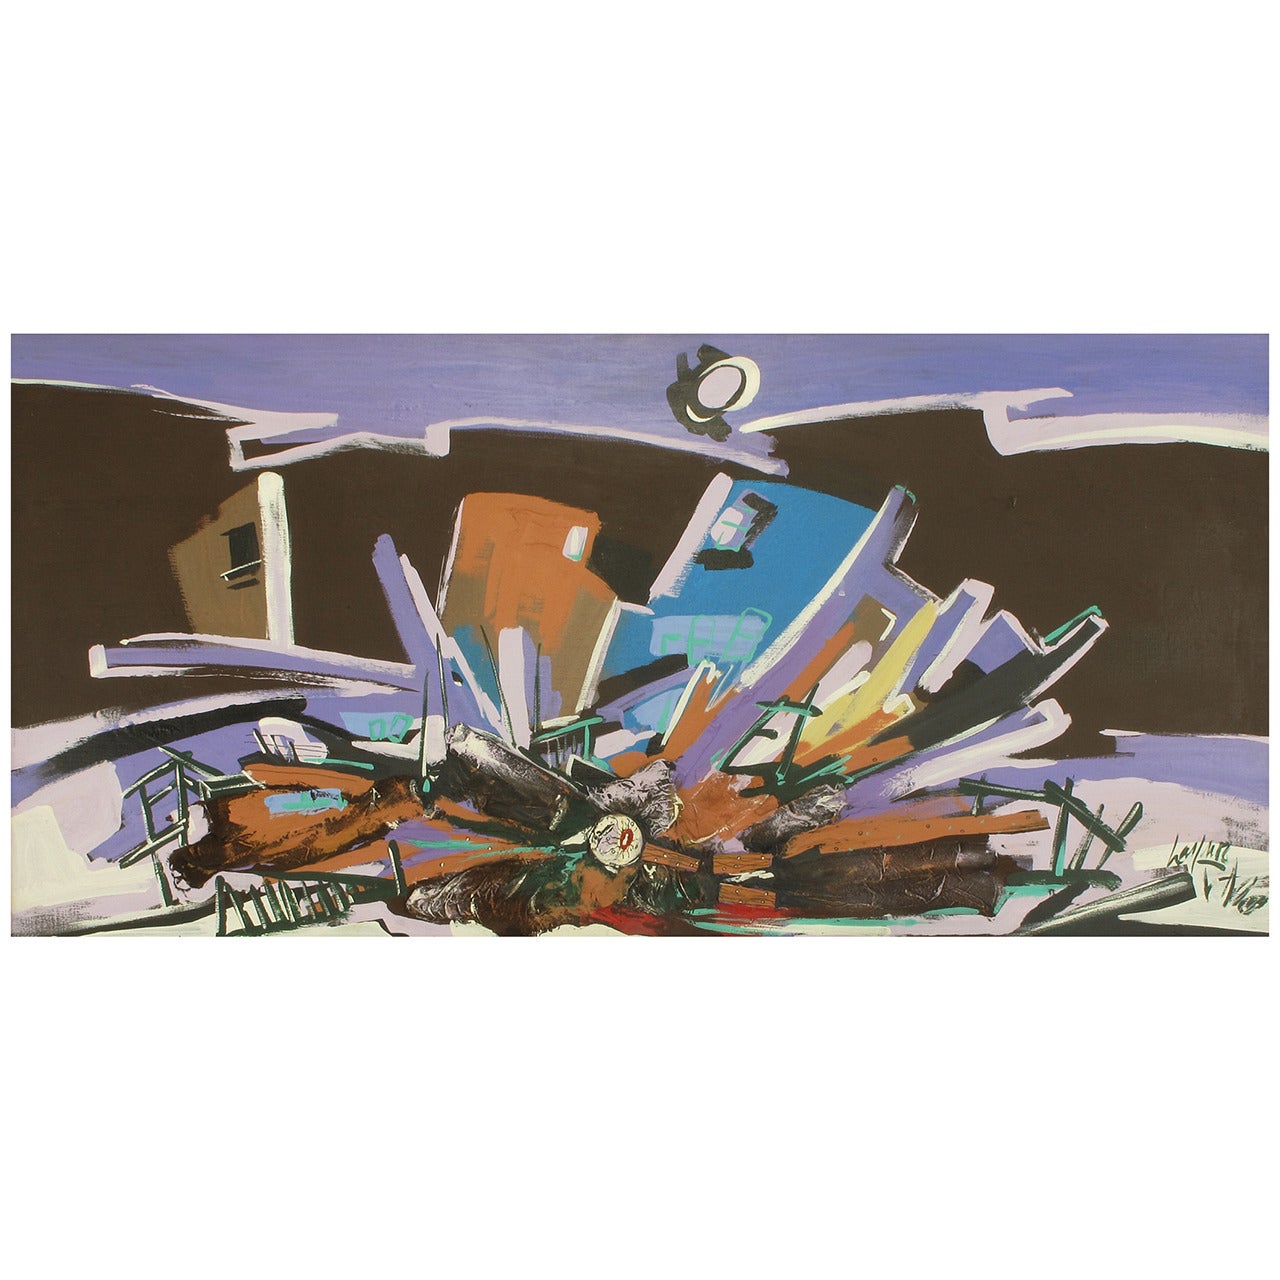 Harold A. Laynor Mixed-Media on Canvas, Titled "Implosion" For Sale